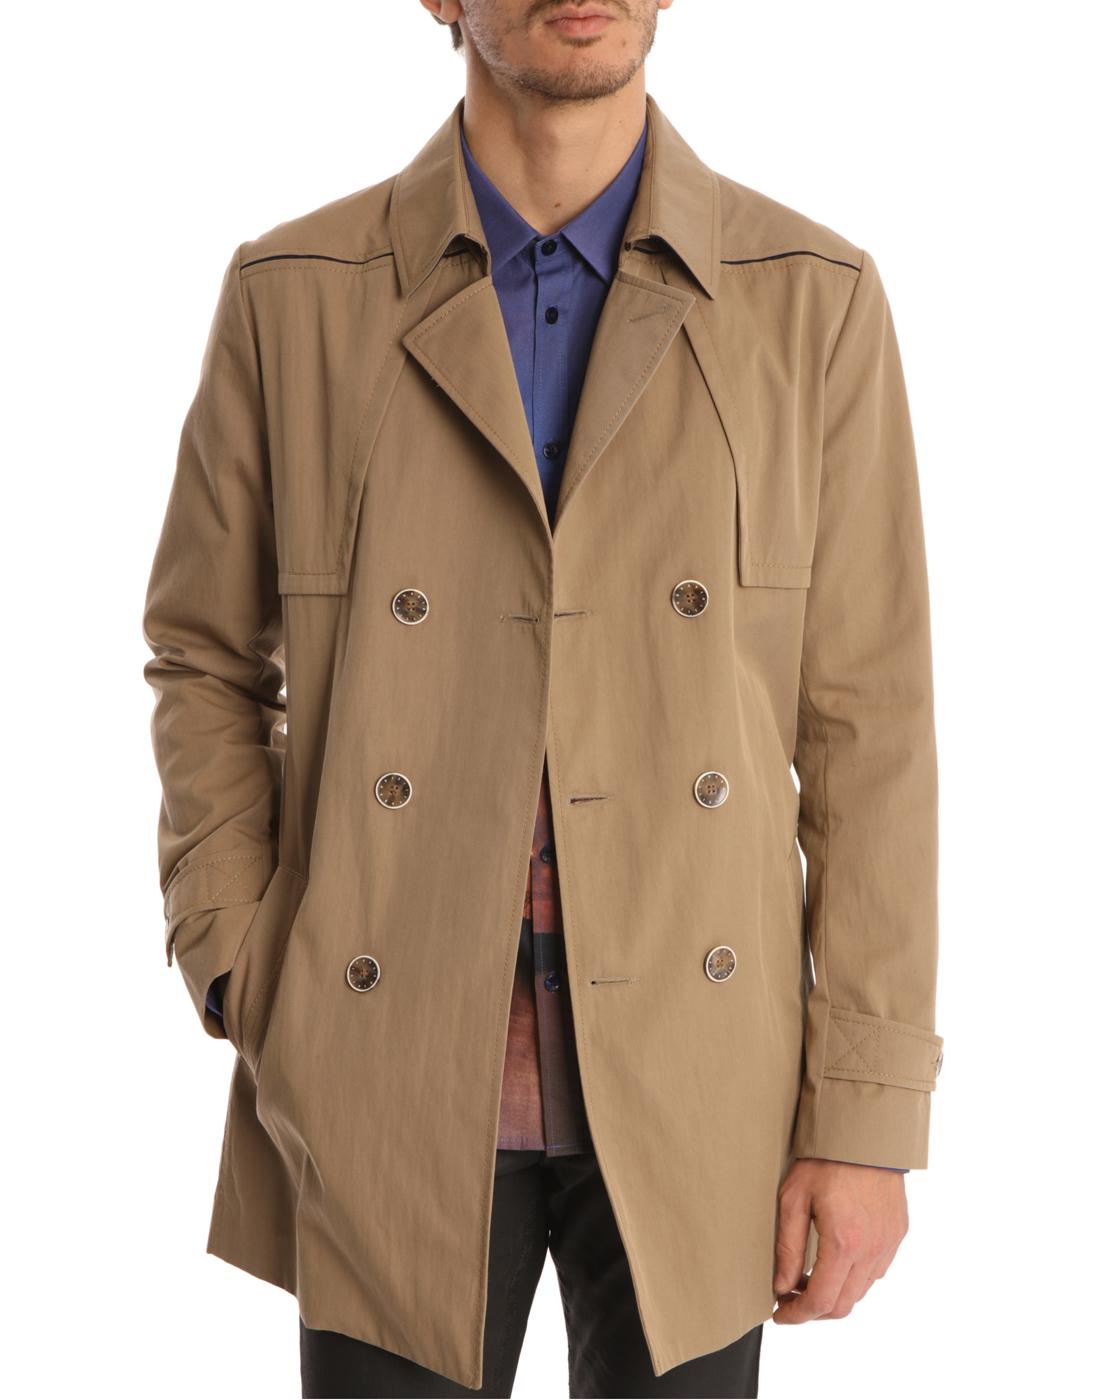 Foto Trench beige Gary con cinturón impermeable